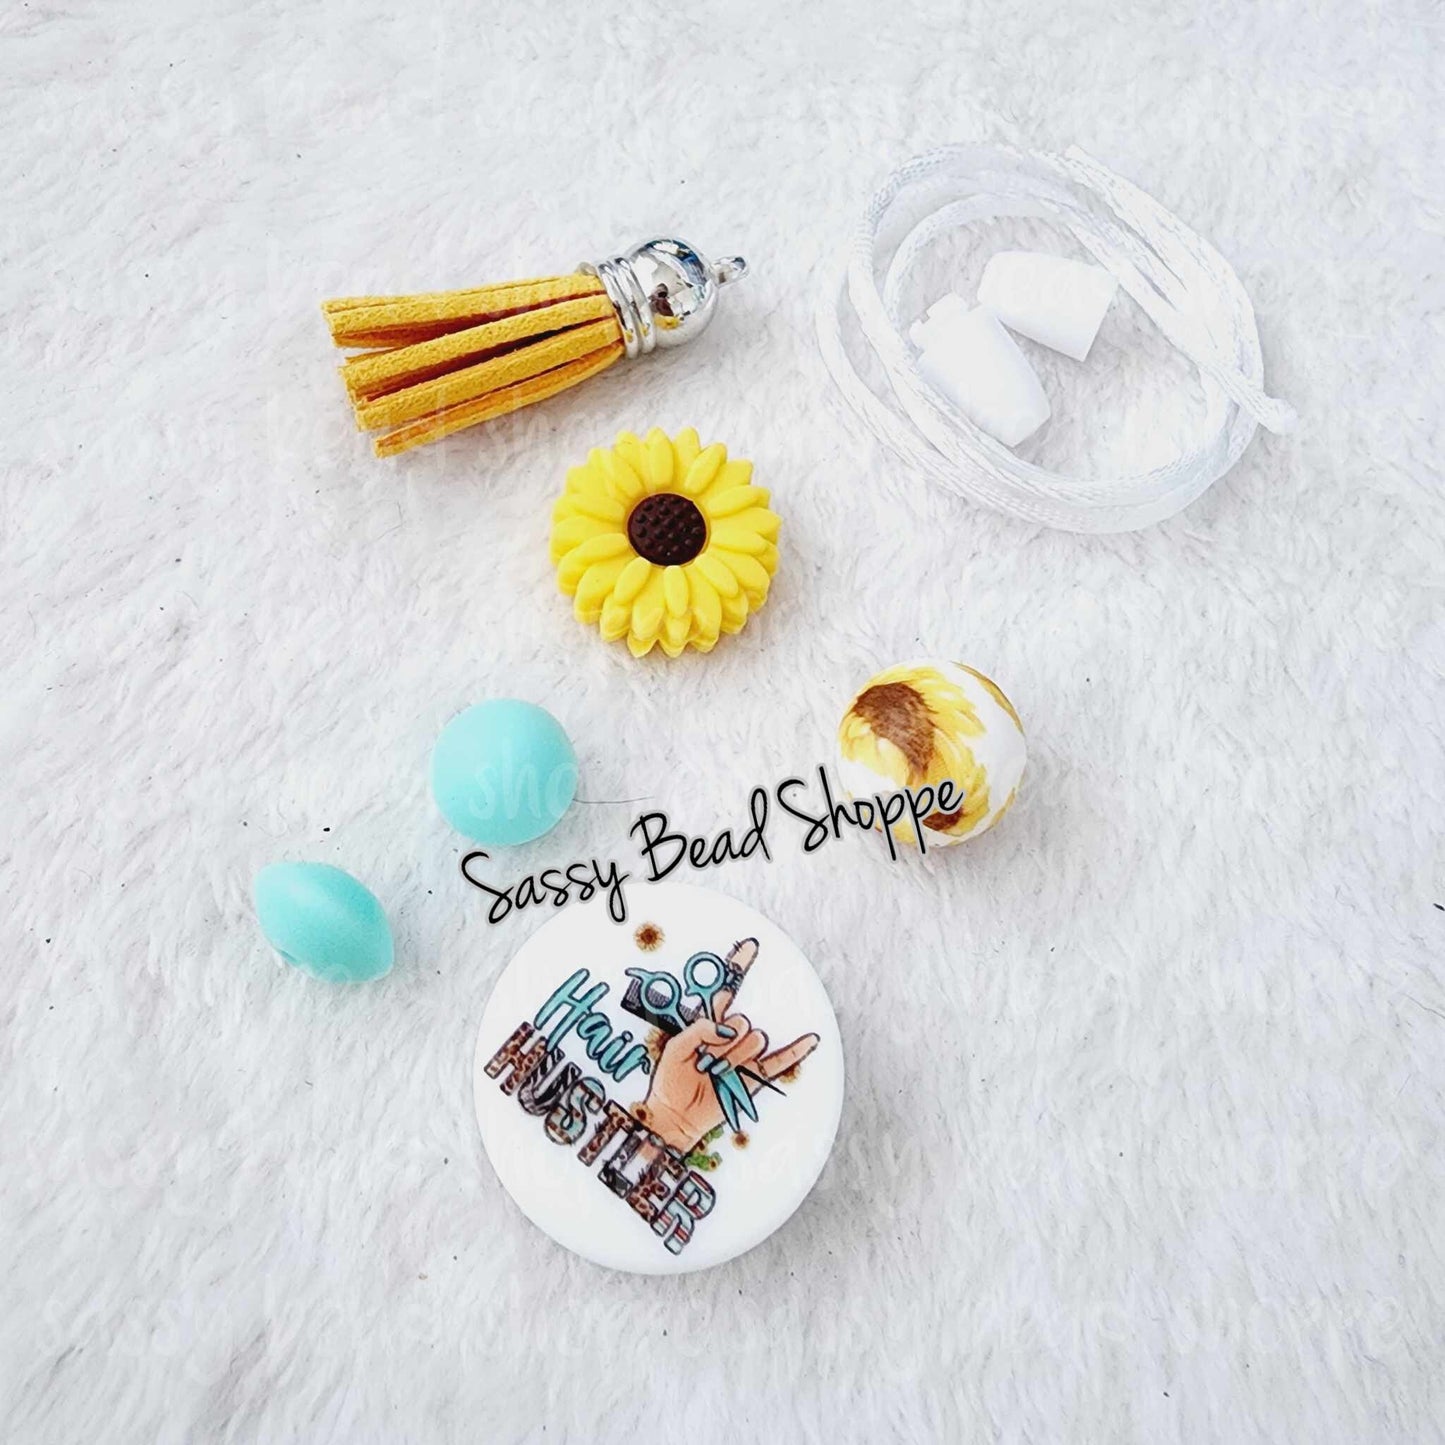 Sassy Bead Shoppe Hair Stylist Car Charm What you will receive in your kit